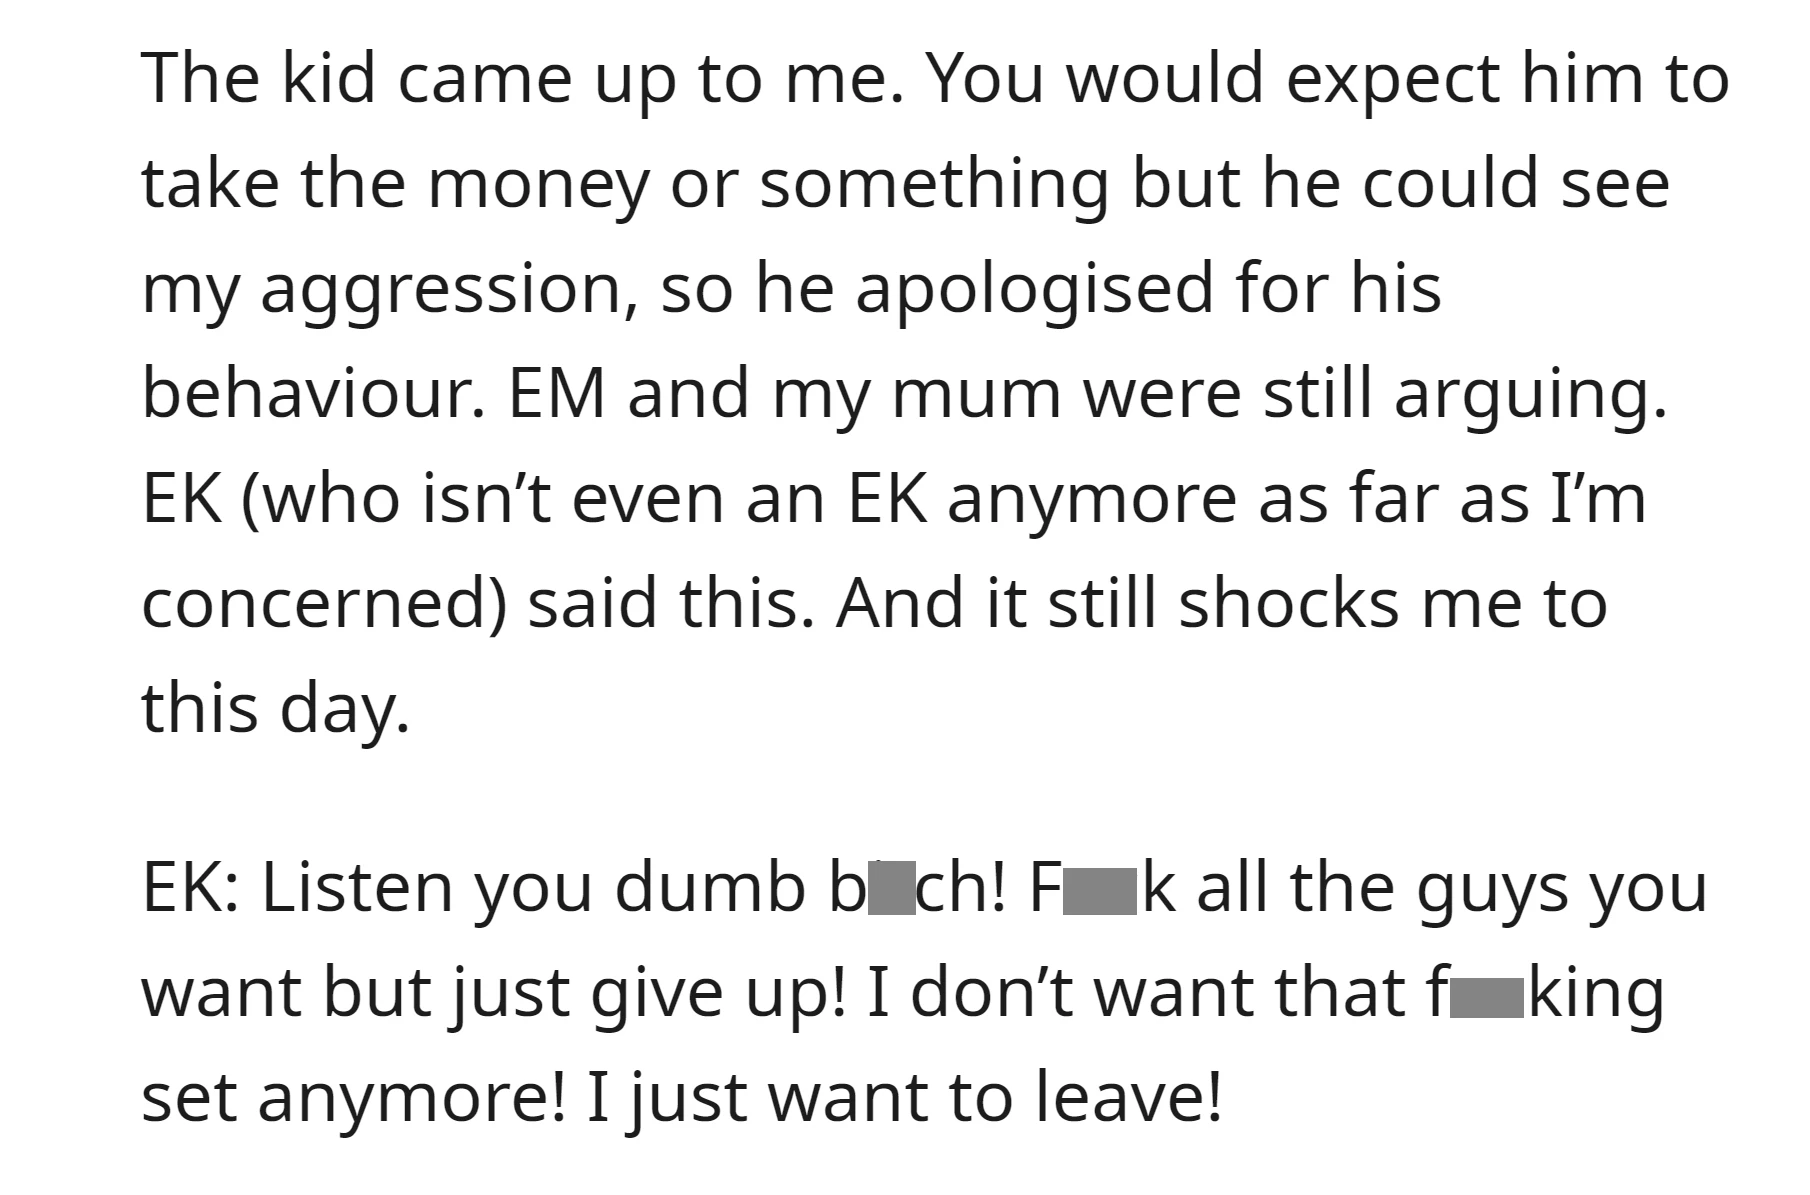 EK, realizing the chaotic situation, apologized to the OP